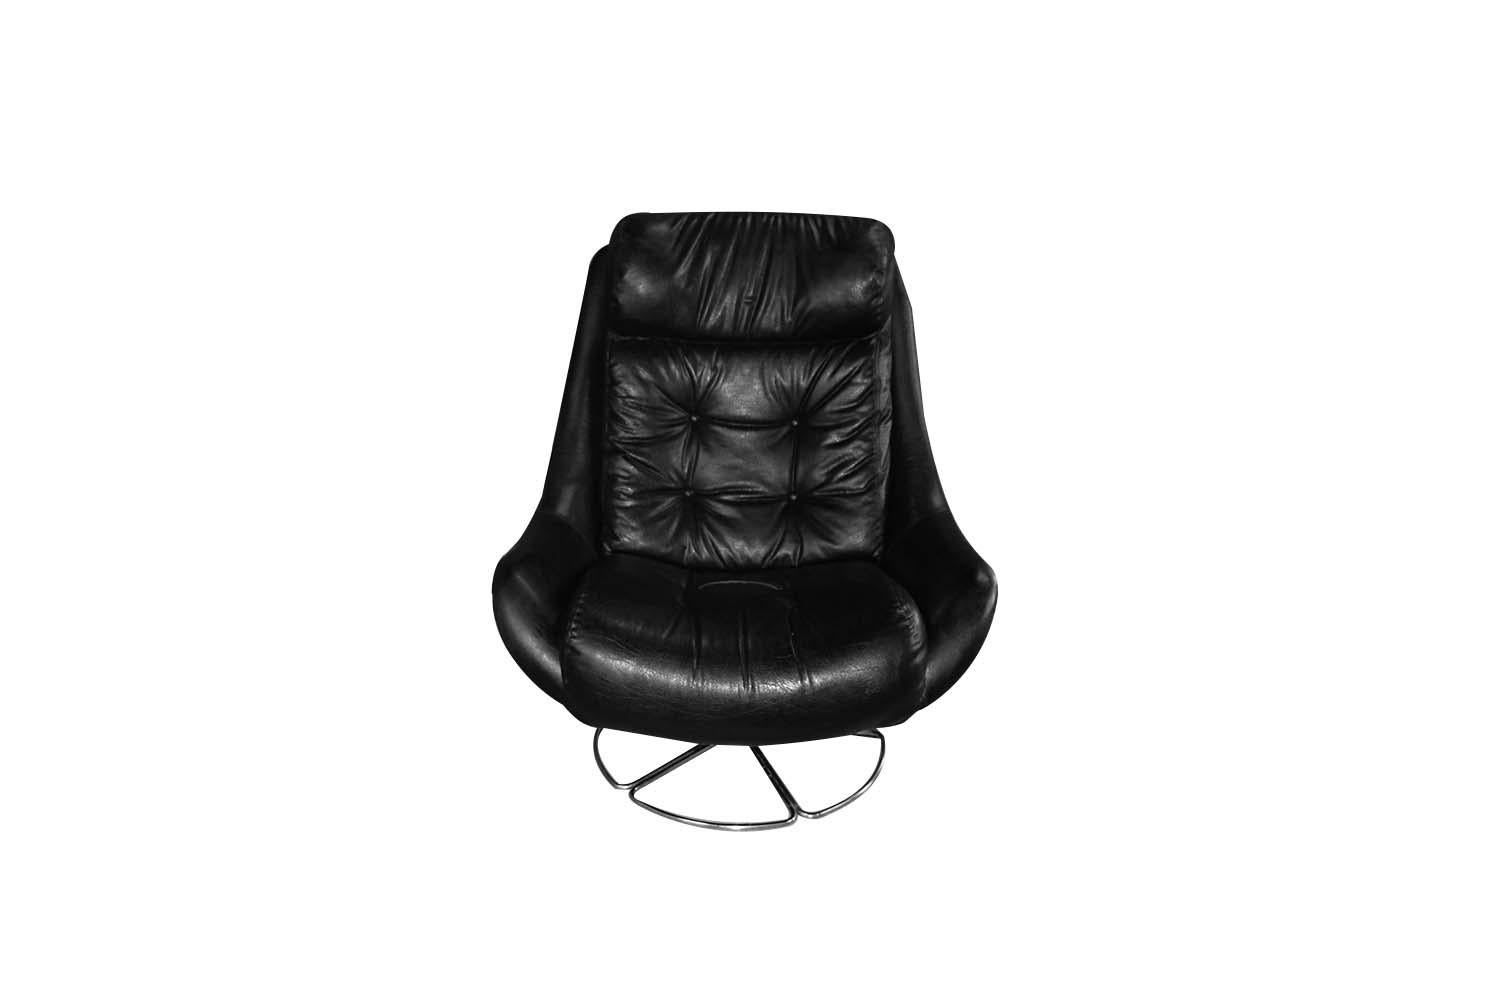 Unknown Midcentury Overman Style High Back Swivel Black Chair